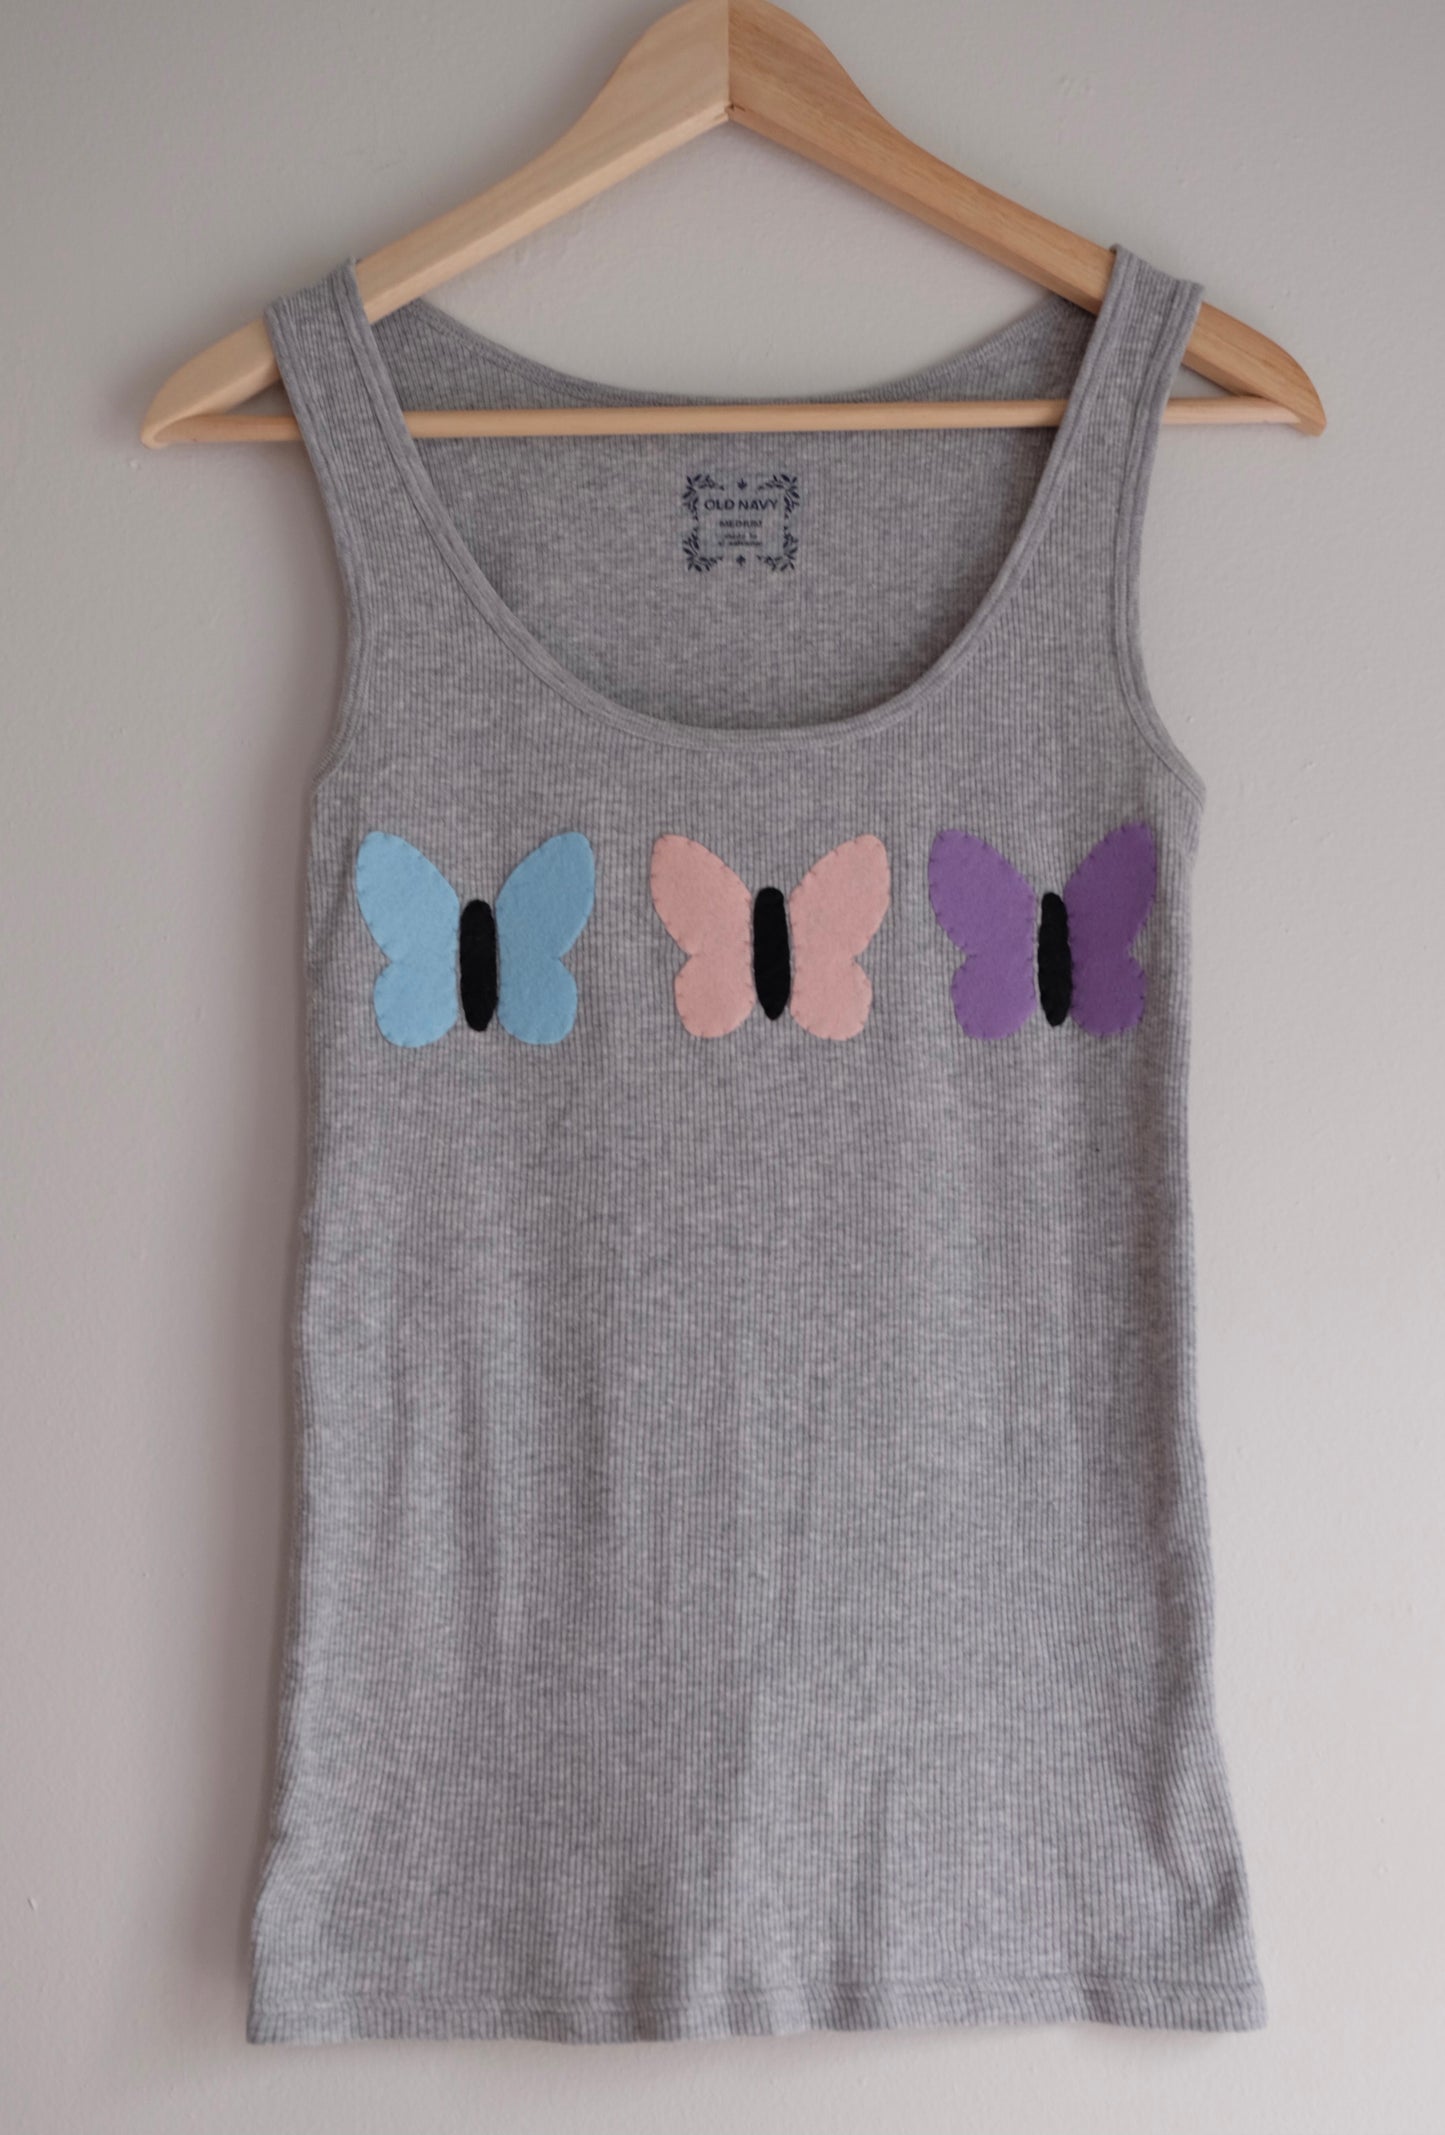 gray tank with butterflies